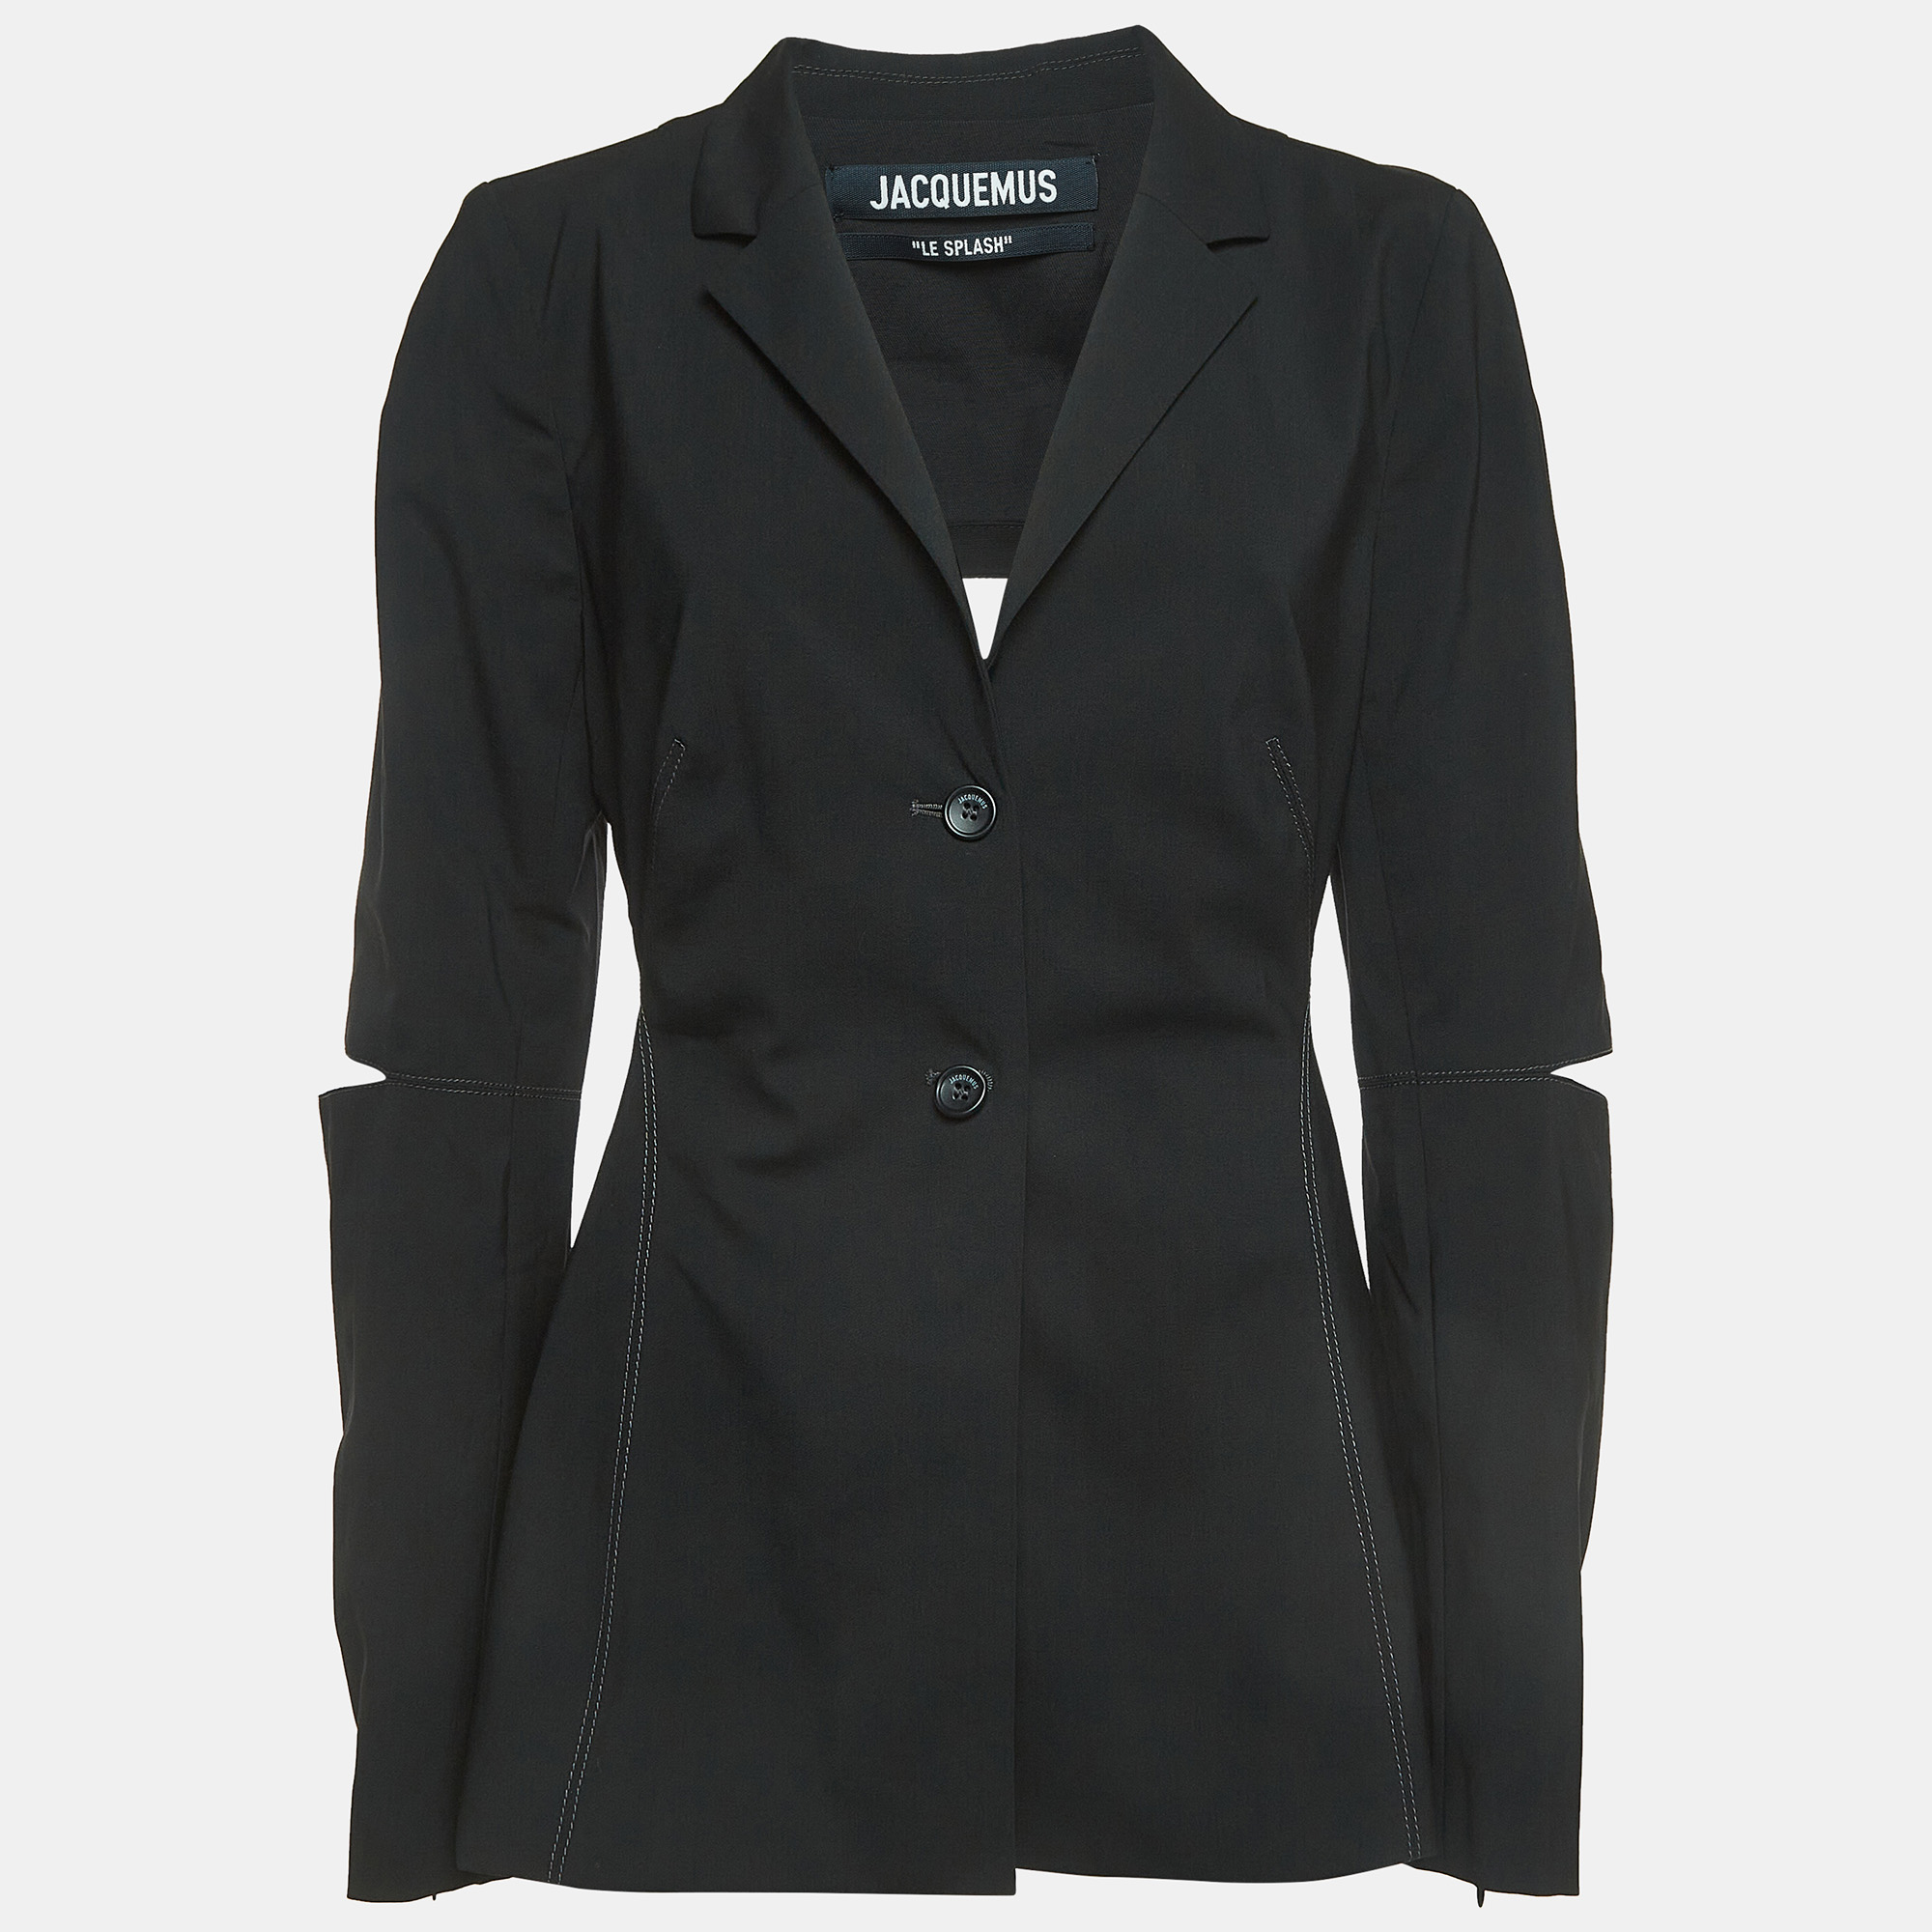 Jacquemus Black Wool Blend Cut-Out Detail Single Breasted Blazer L